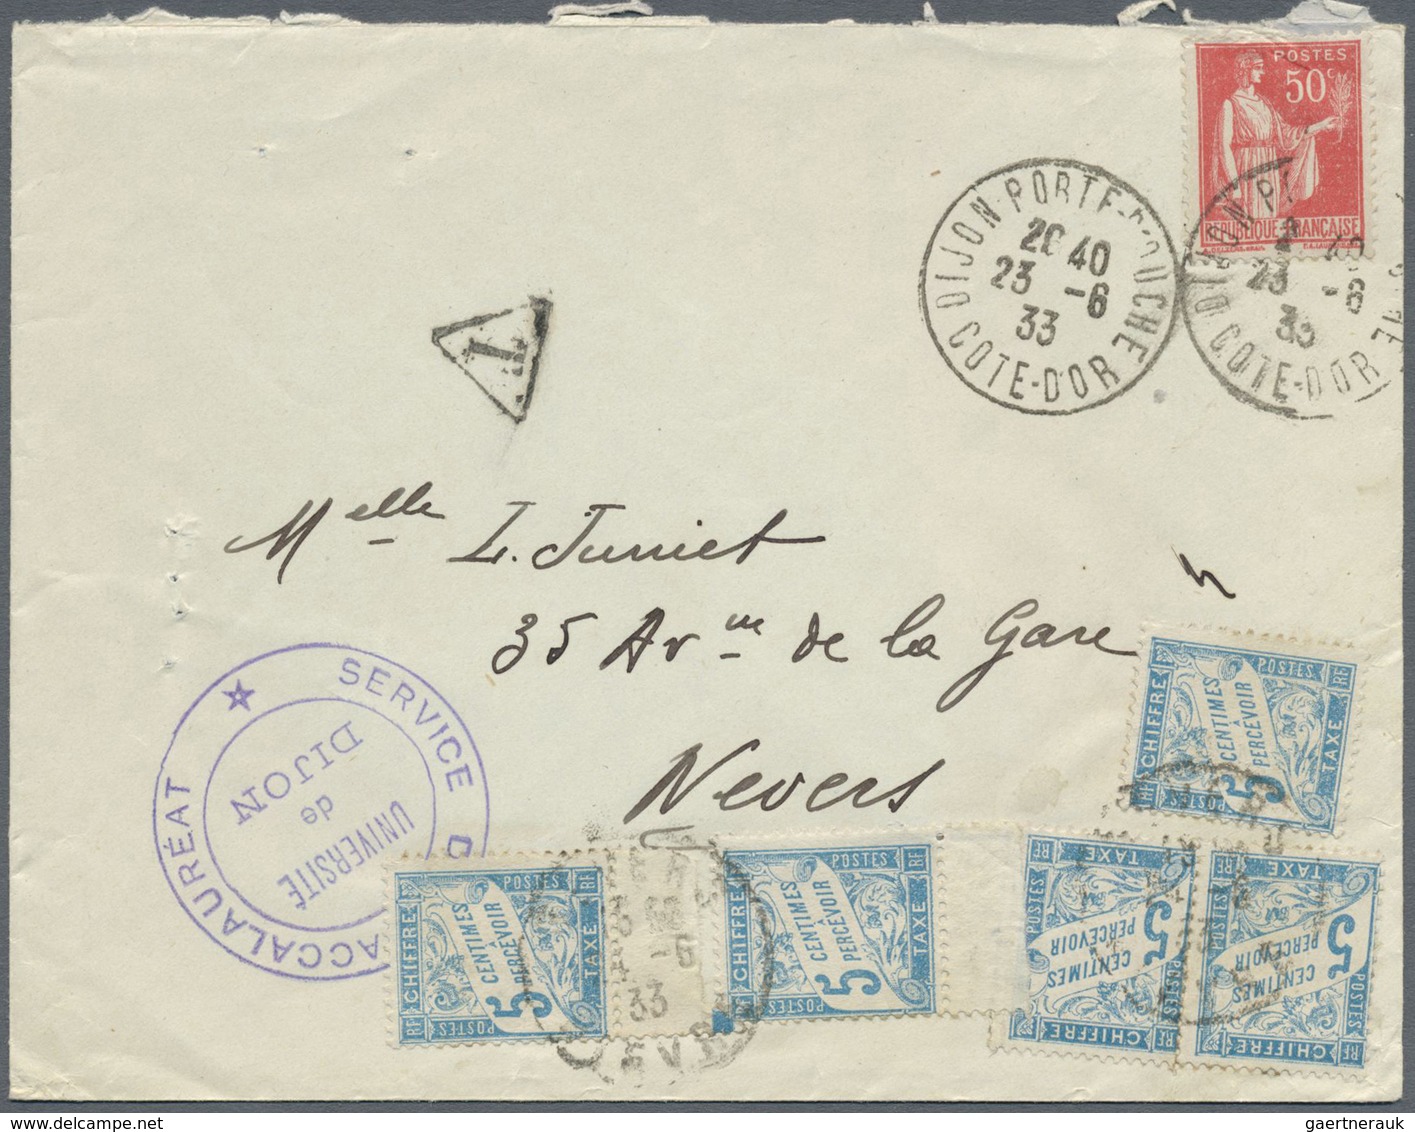 Br Frankreich - Portomarken: 1850/1980 (ca.), insufficiently paid domestic mail, holding of apprx. 230